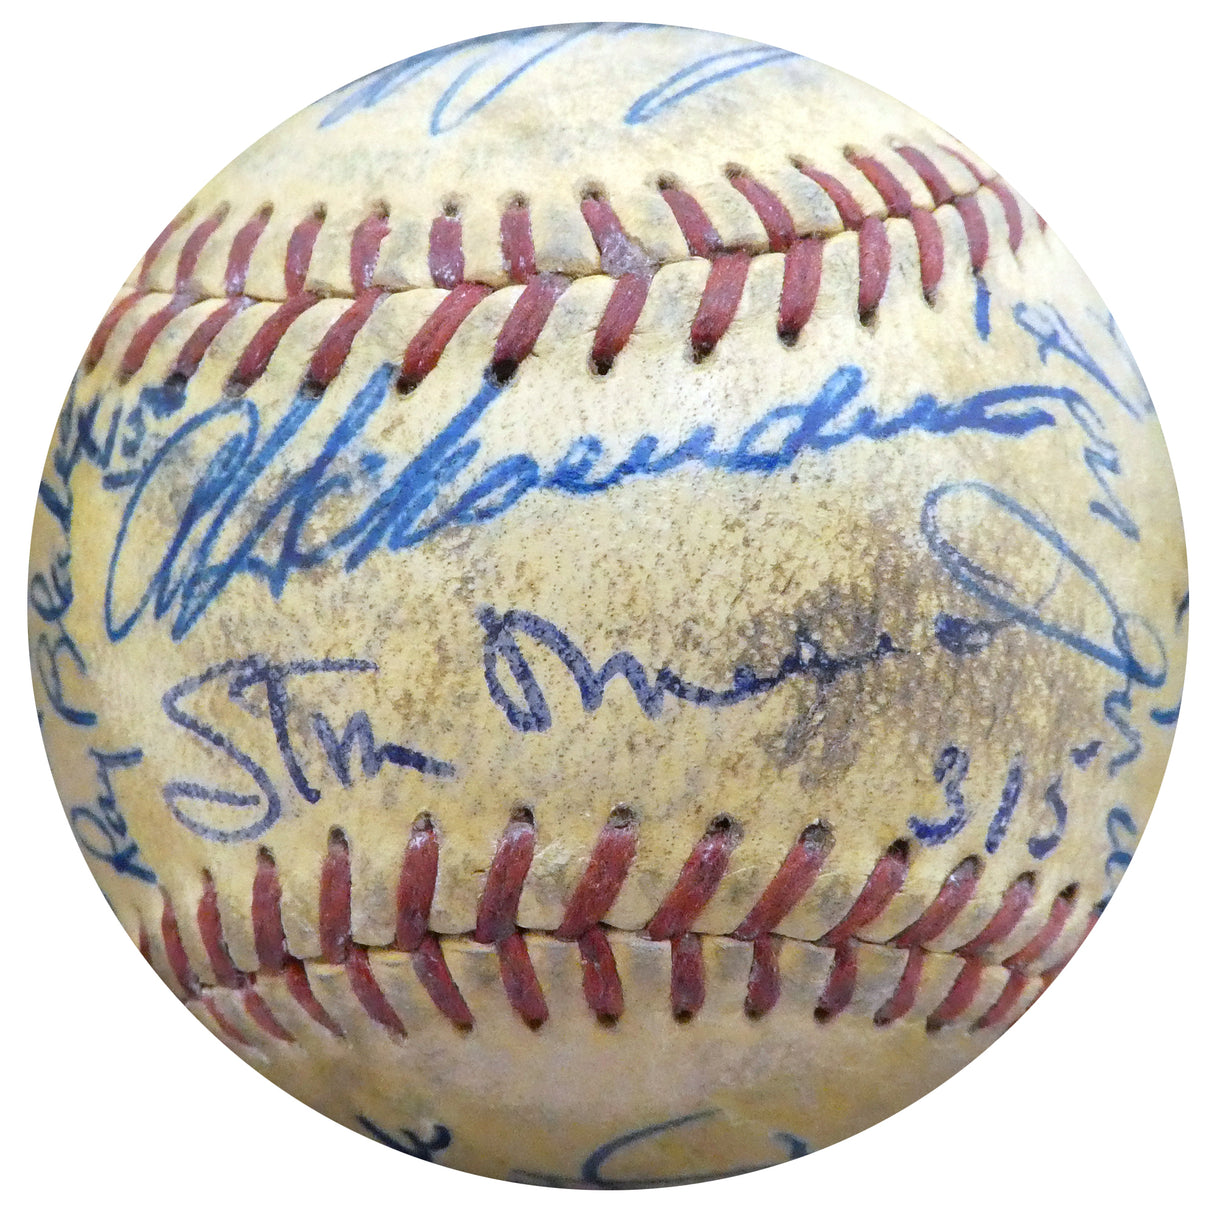 1951 St. Louis Cardinals & Cincinnati Reds Autographed Official Baseball With 23 Total Signatures Including Stan Musial Beckett BAS #A52633